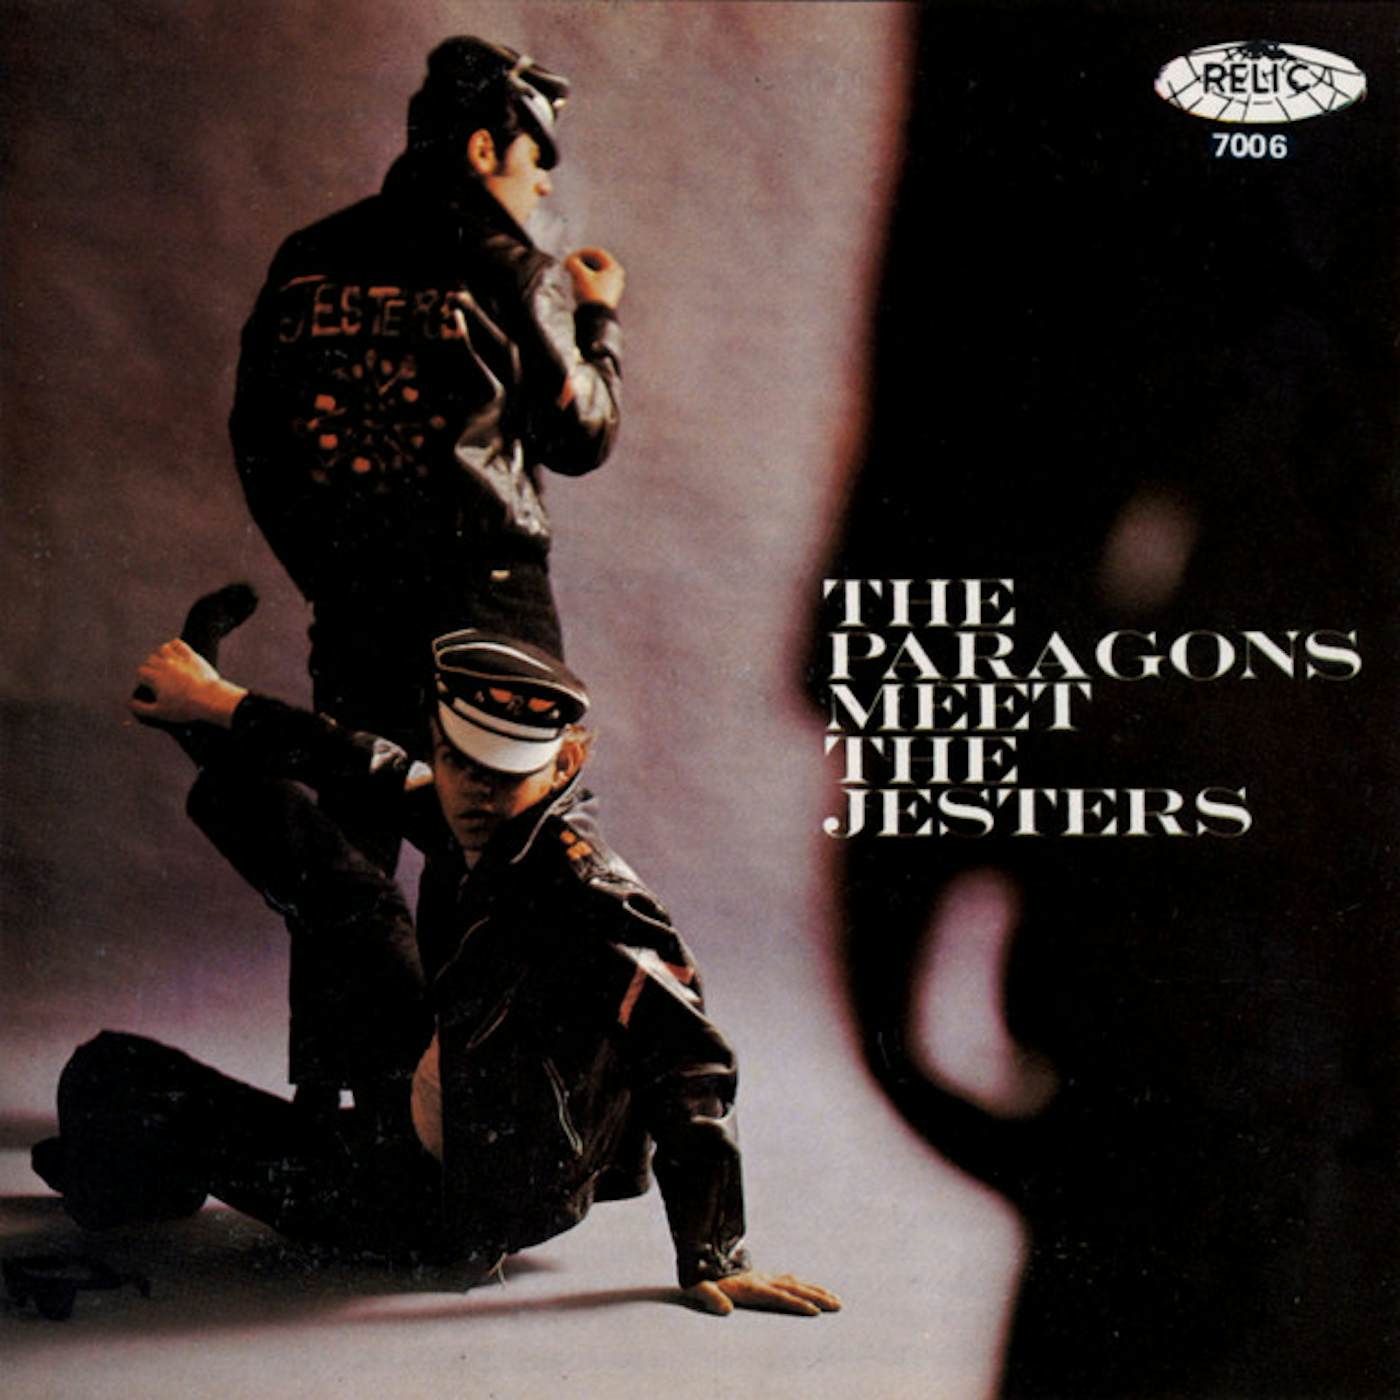 The Paragons MEET THE JESTERS CD